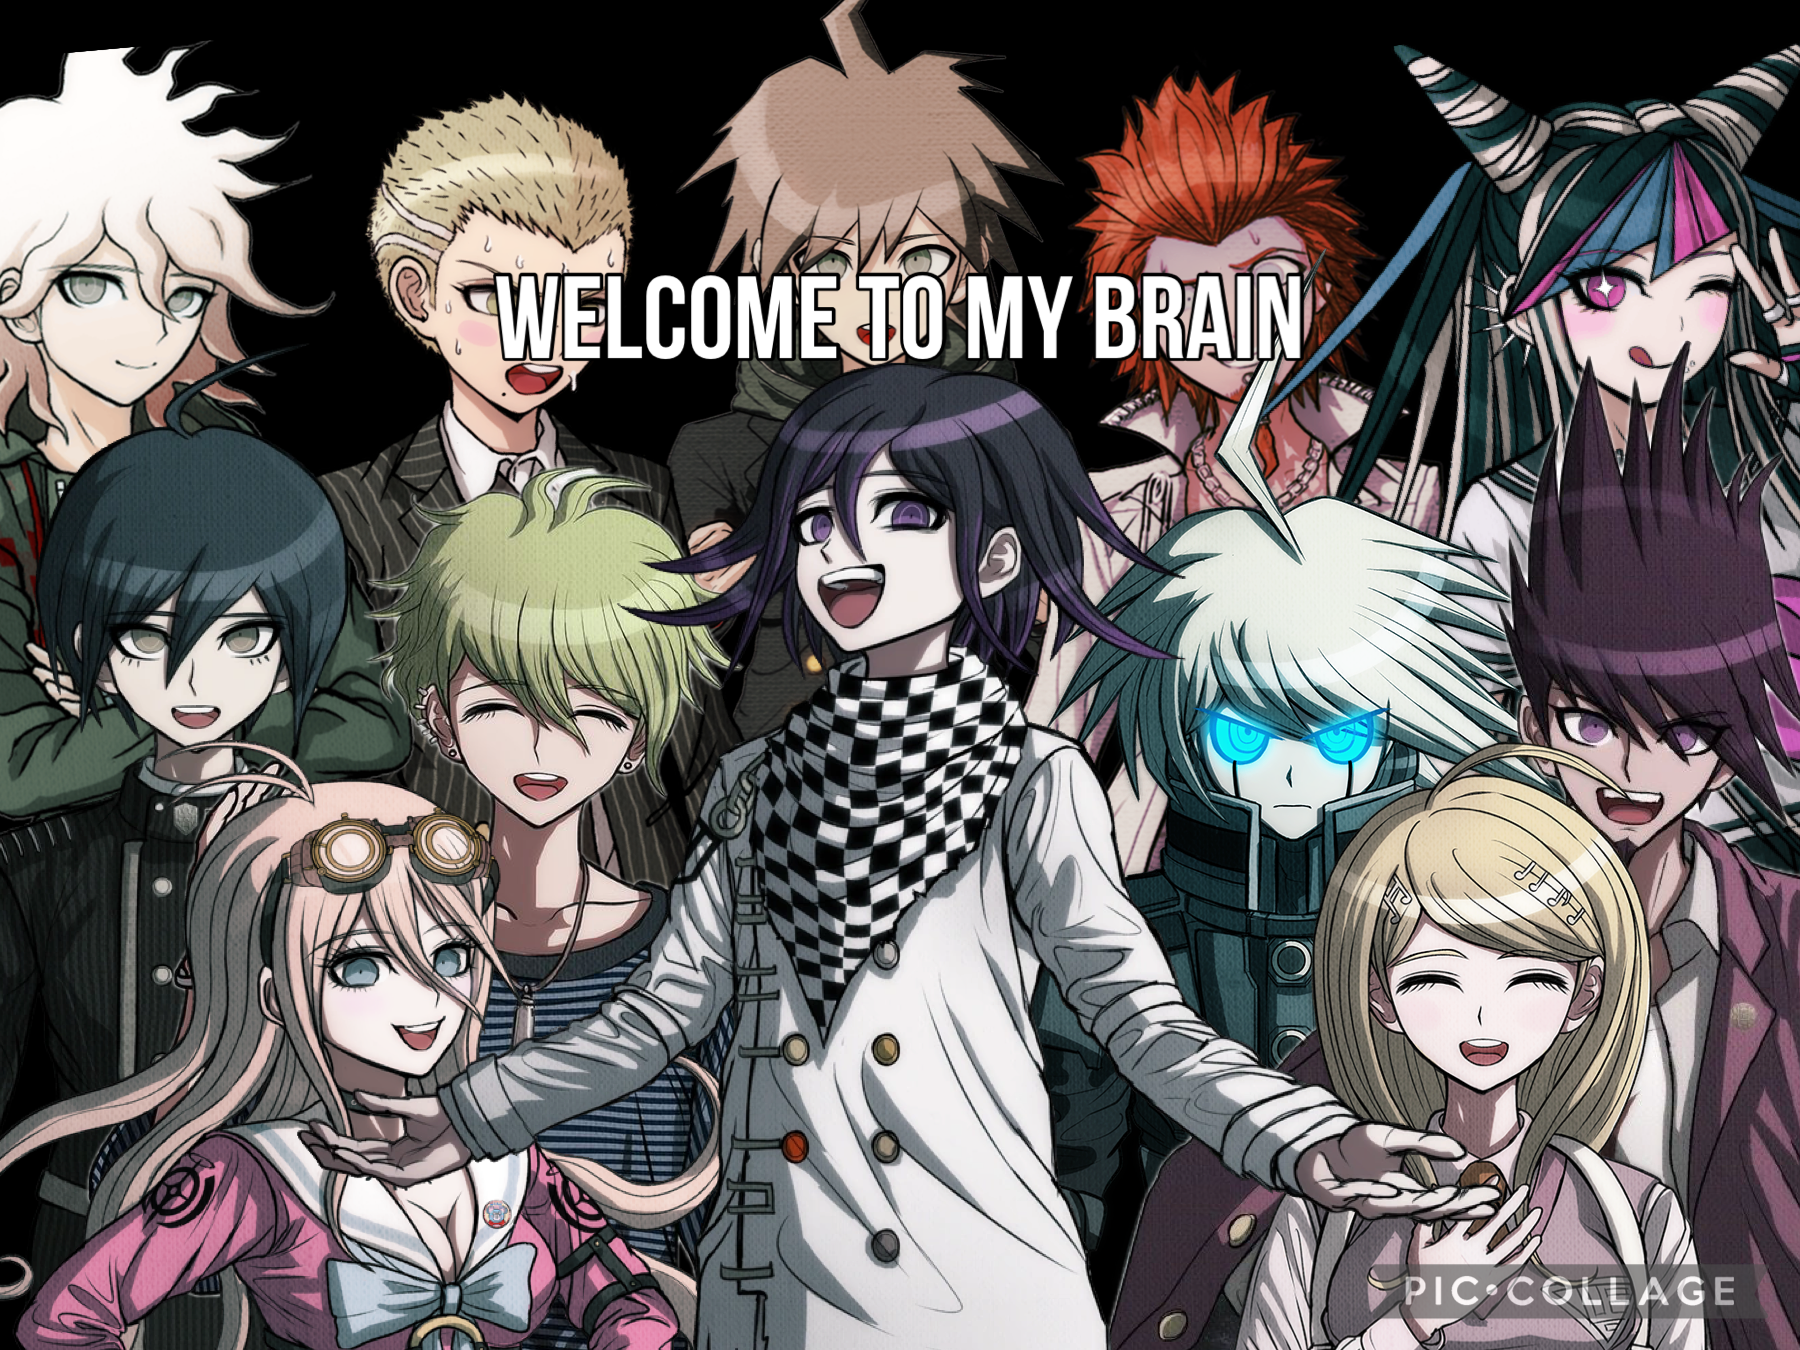 Welcome to my brain, literally full of Danganronpa Characters. Amazing. And yes, these are all my fav characters because why not *I’m missing 2 others but not including them*